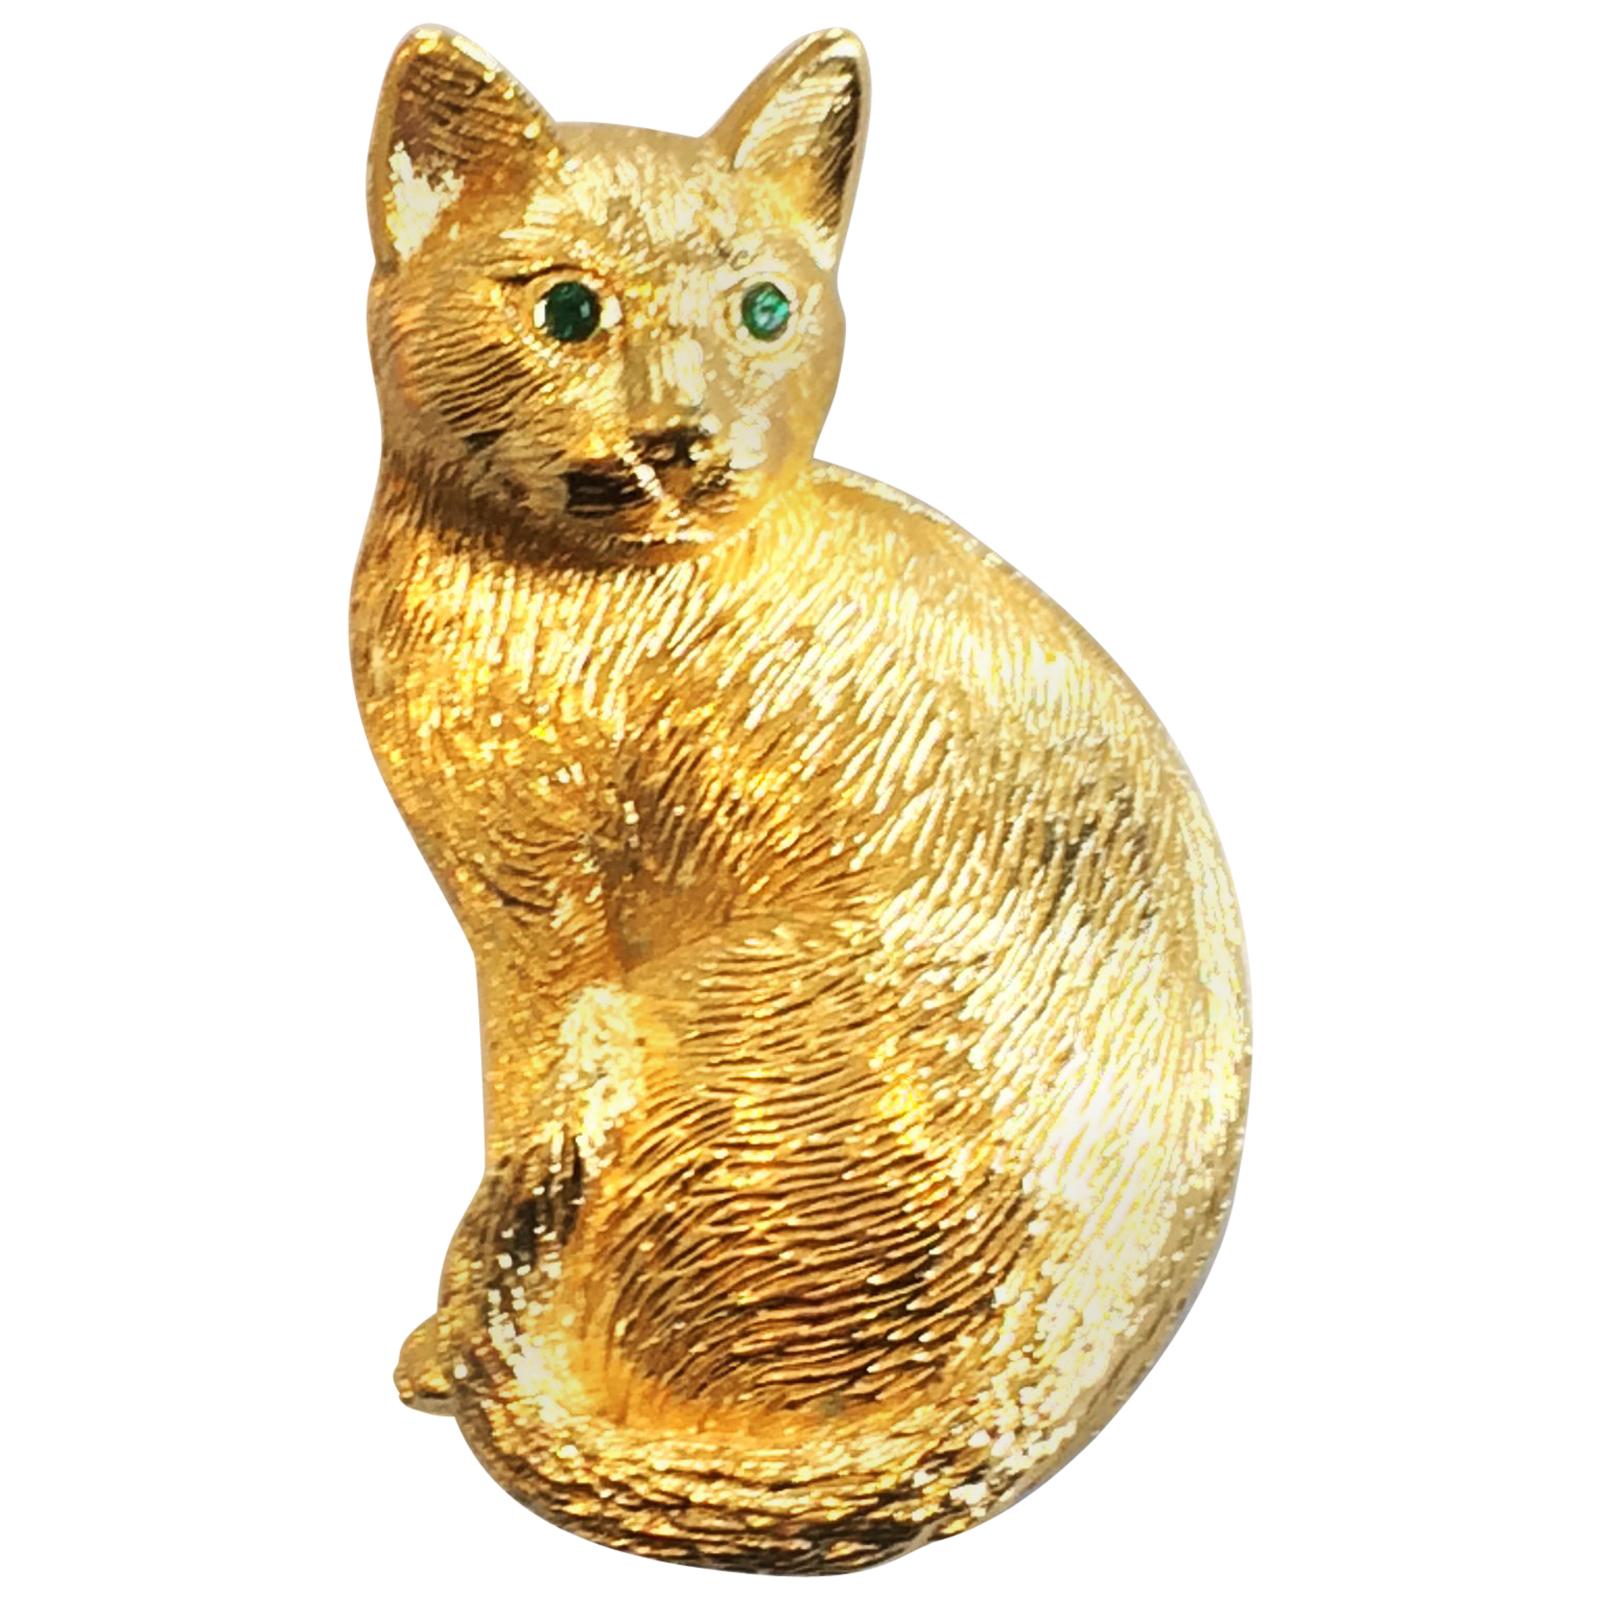 Christian Dior 1960s Cat brooch or pin in gilt metal with emerald eyes